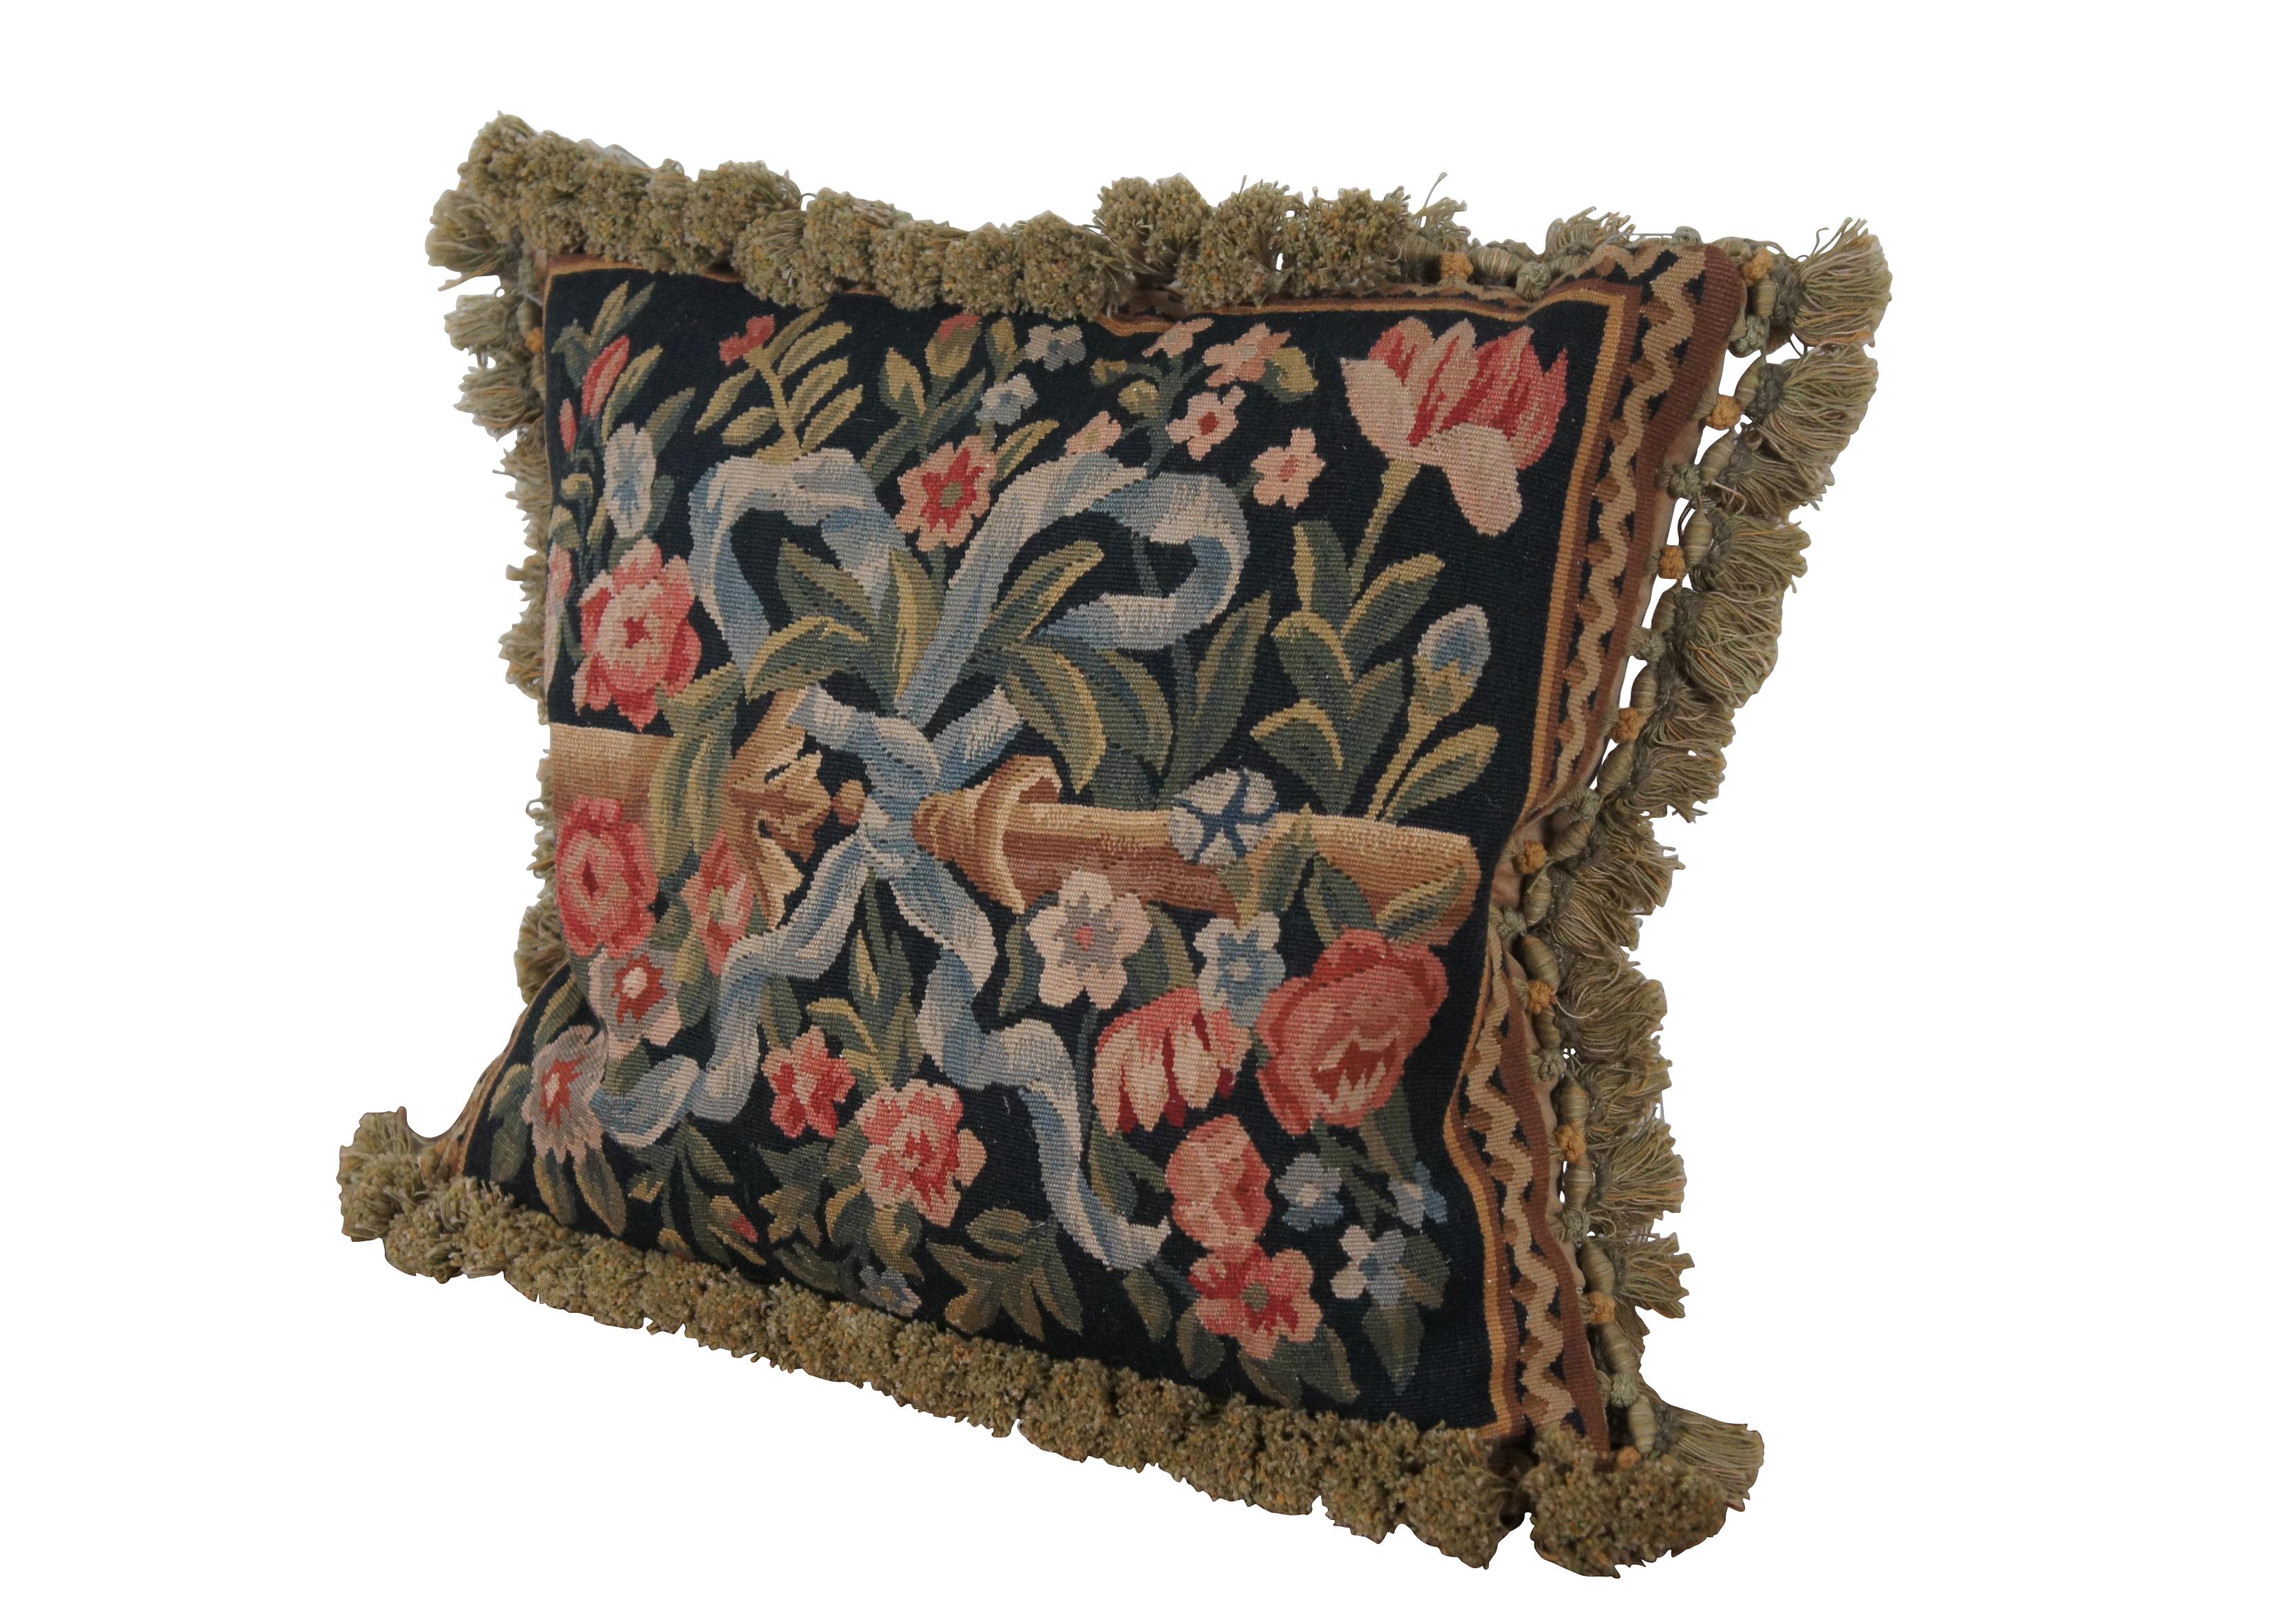 20th century square throw pillow, embroidered with blue flowers and pink roses on leafy stems, surrounding a golden bar tied with a blue ribbon / bow, all on a deep navy blue background. Olive green and gold tassel trim. Brown velour back with